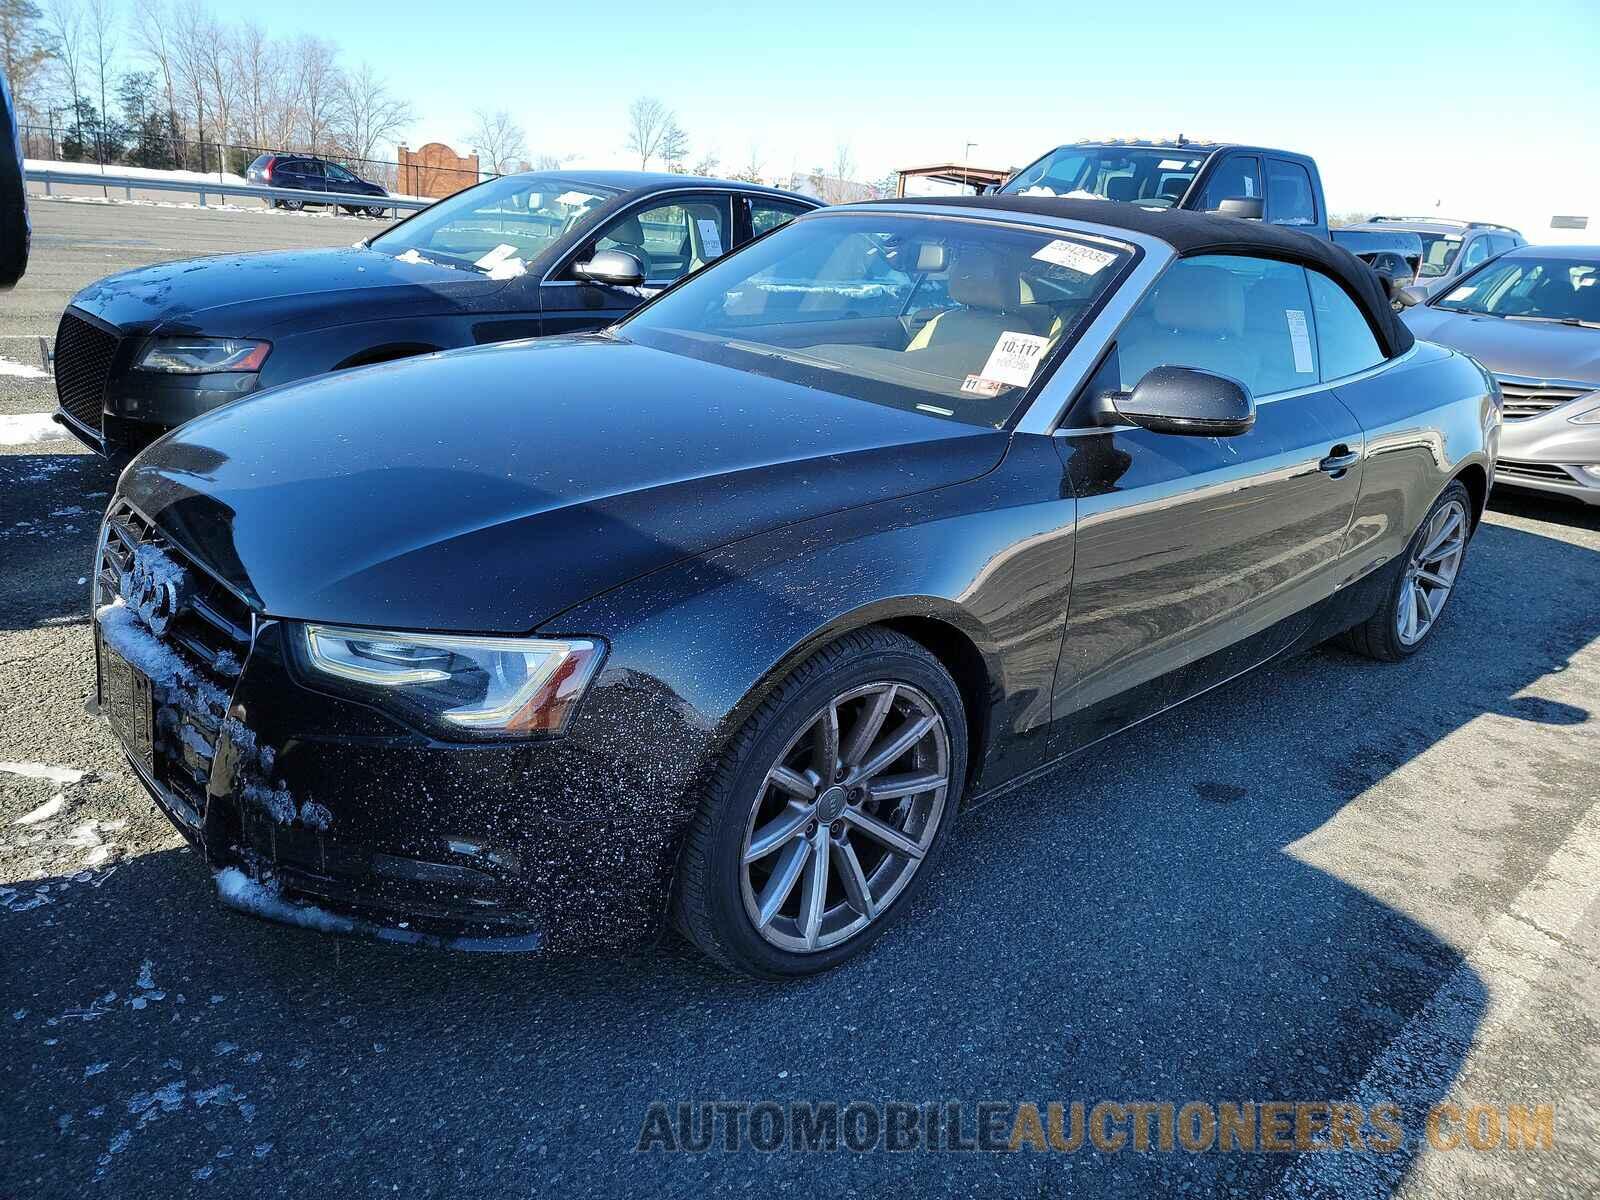 WAUCFAFH4FN001028 Audi A5 Cabriolet 2015